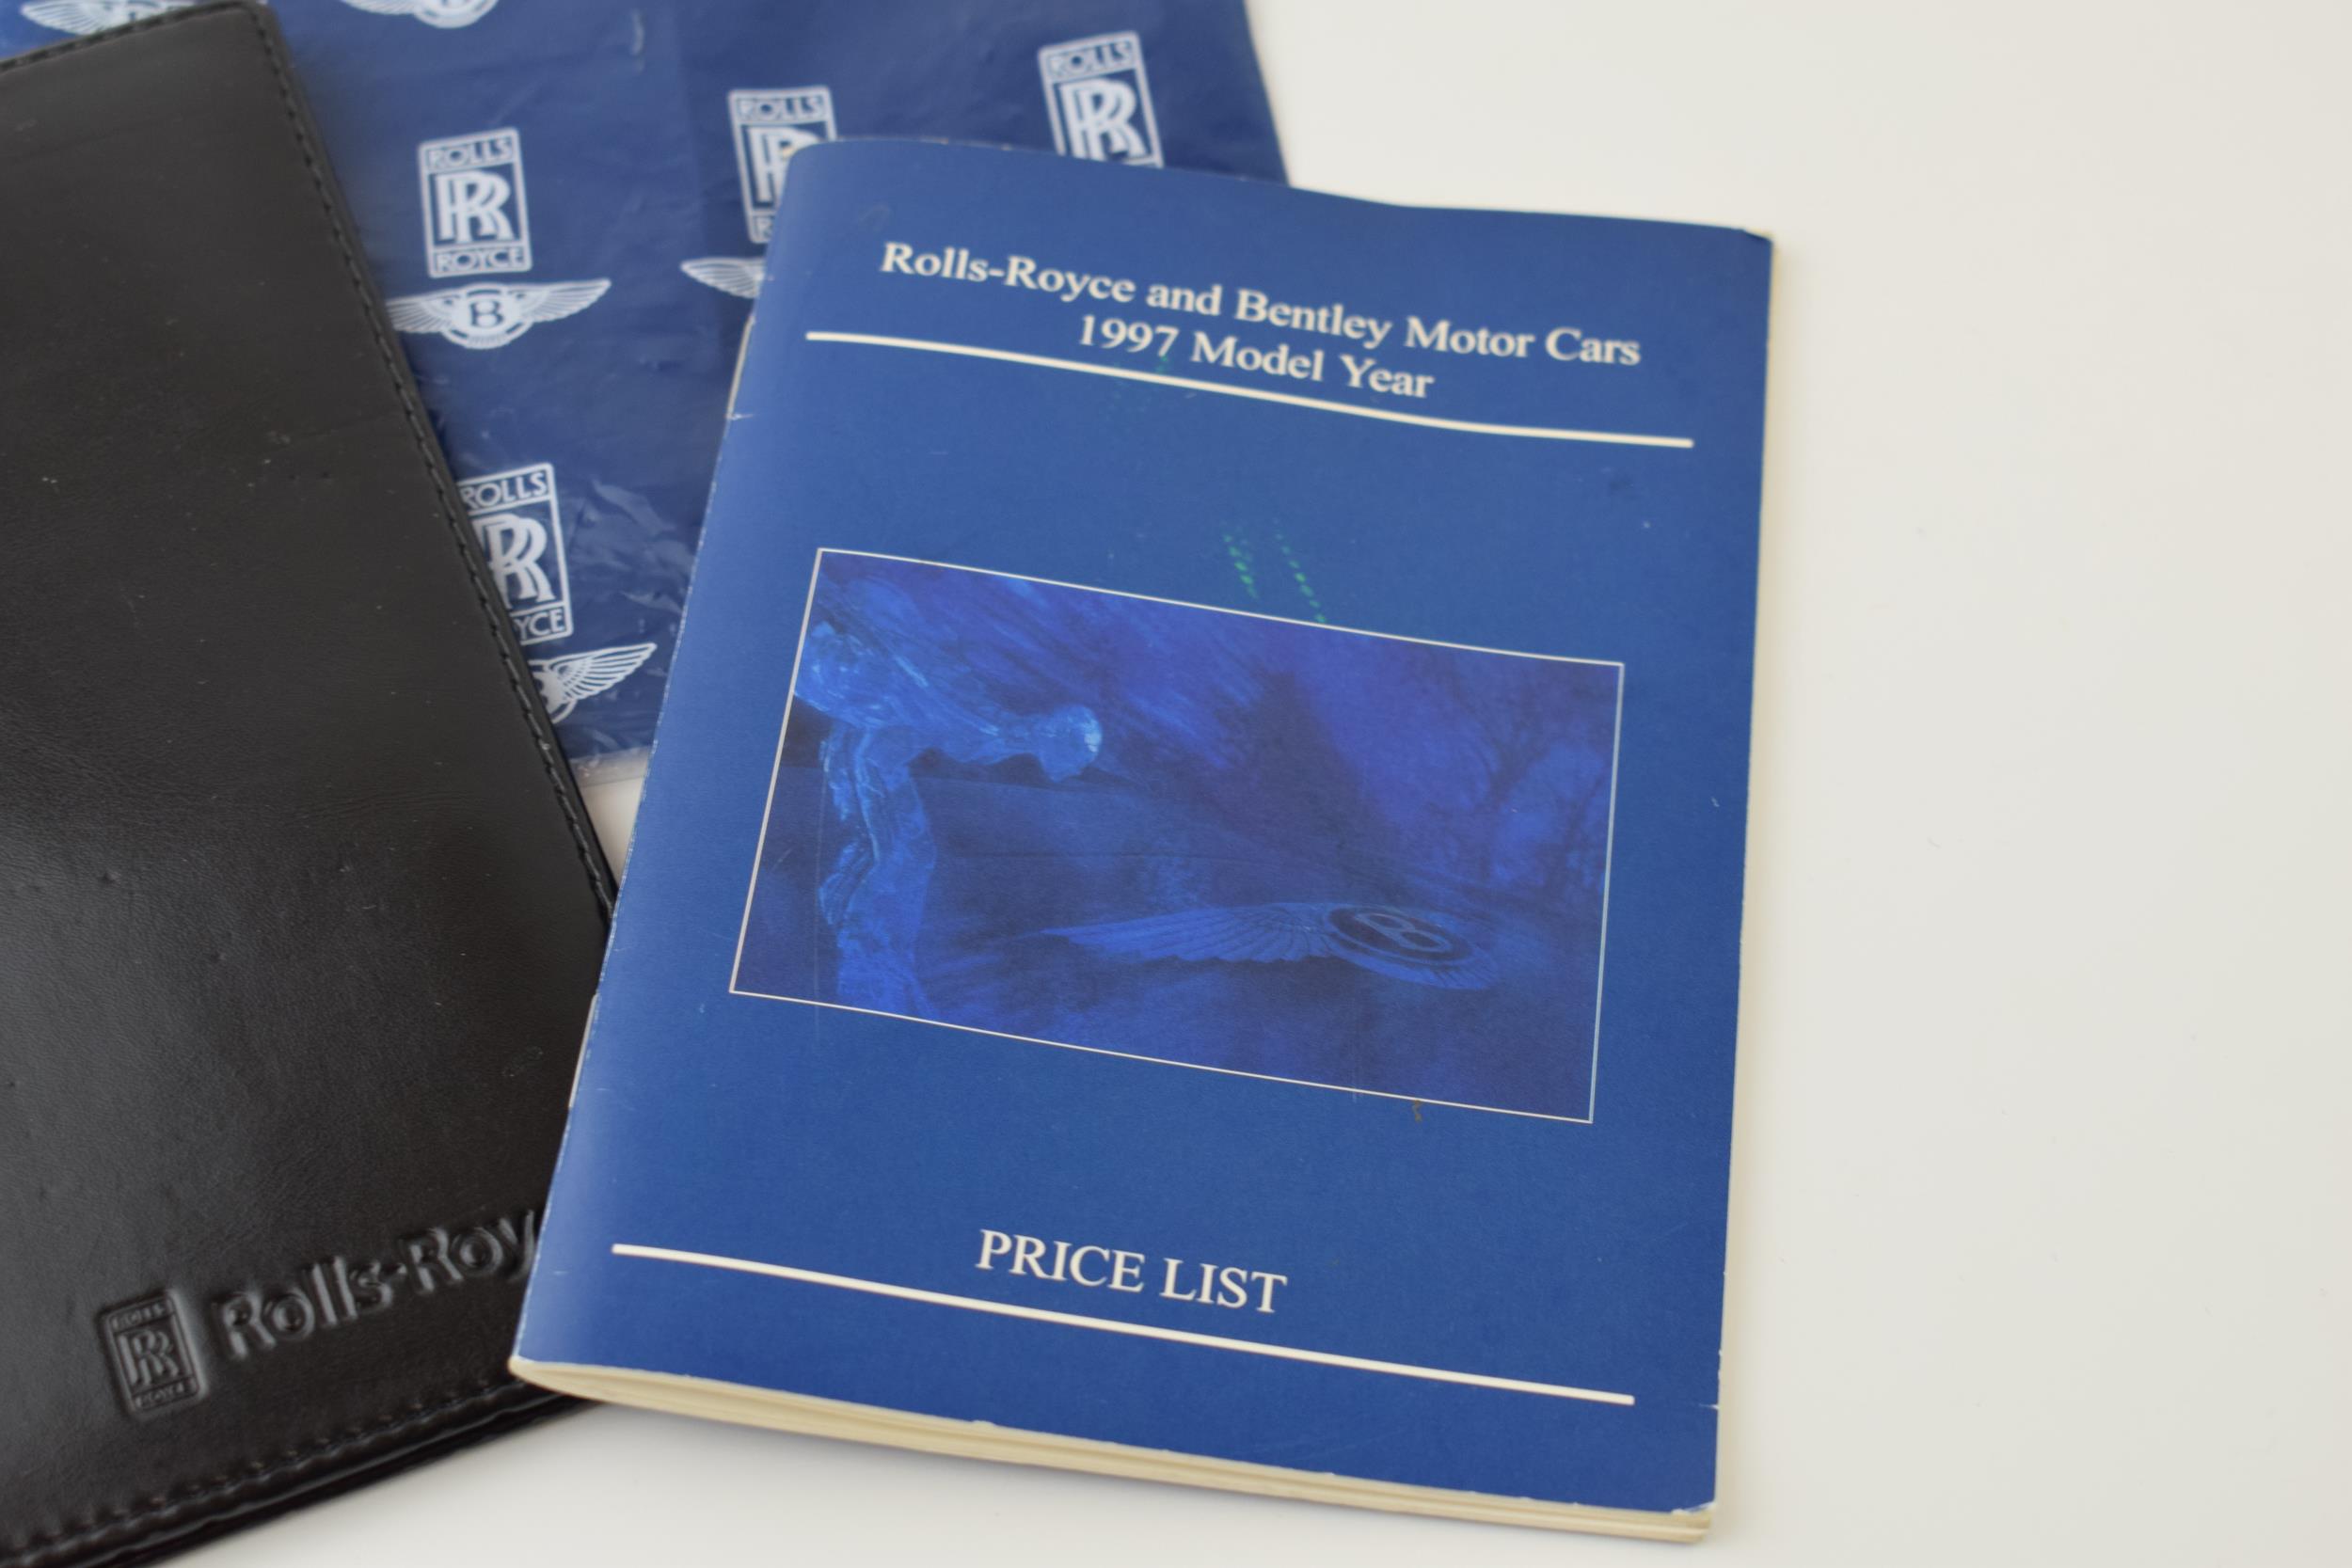 A 'Rolls-Royce and Bentley Motor Cars' 1997 Model Year, Price List, black leather Rolls-Royce wallet - Image 3 of 4